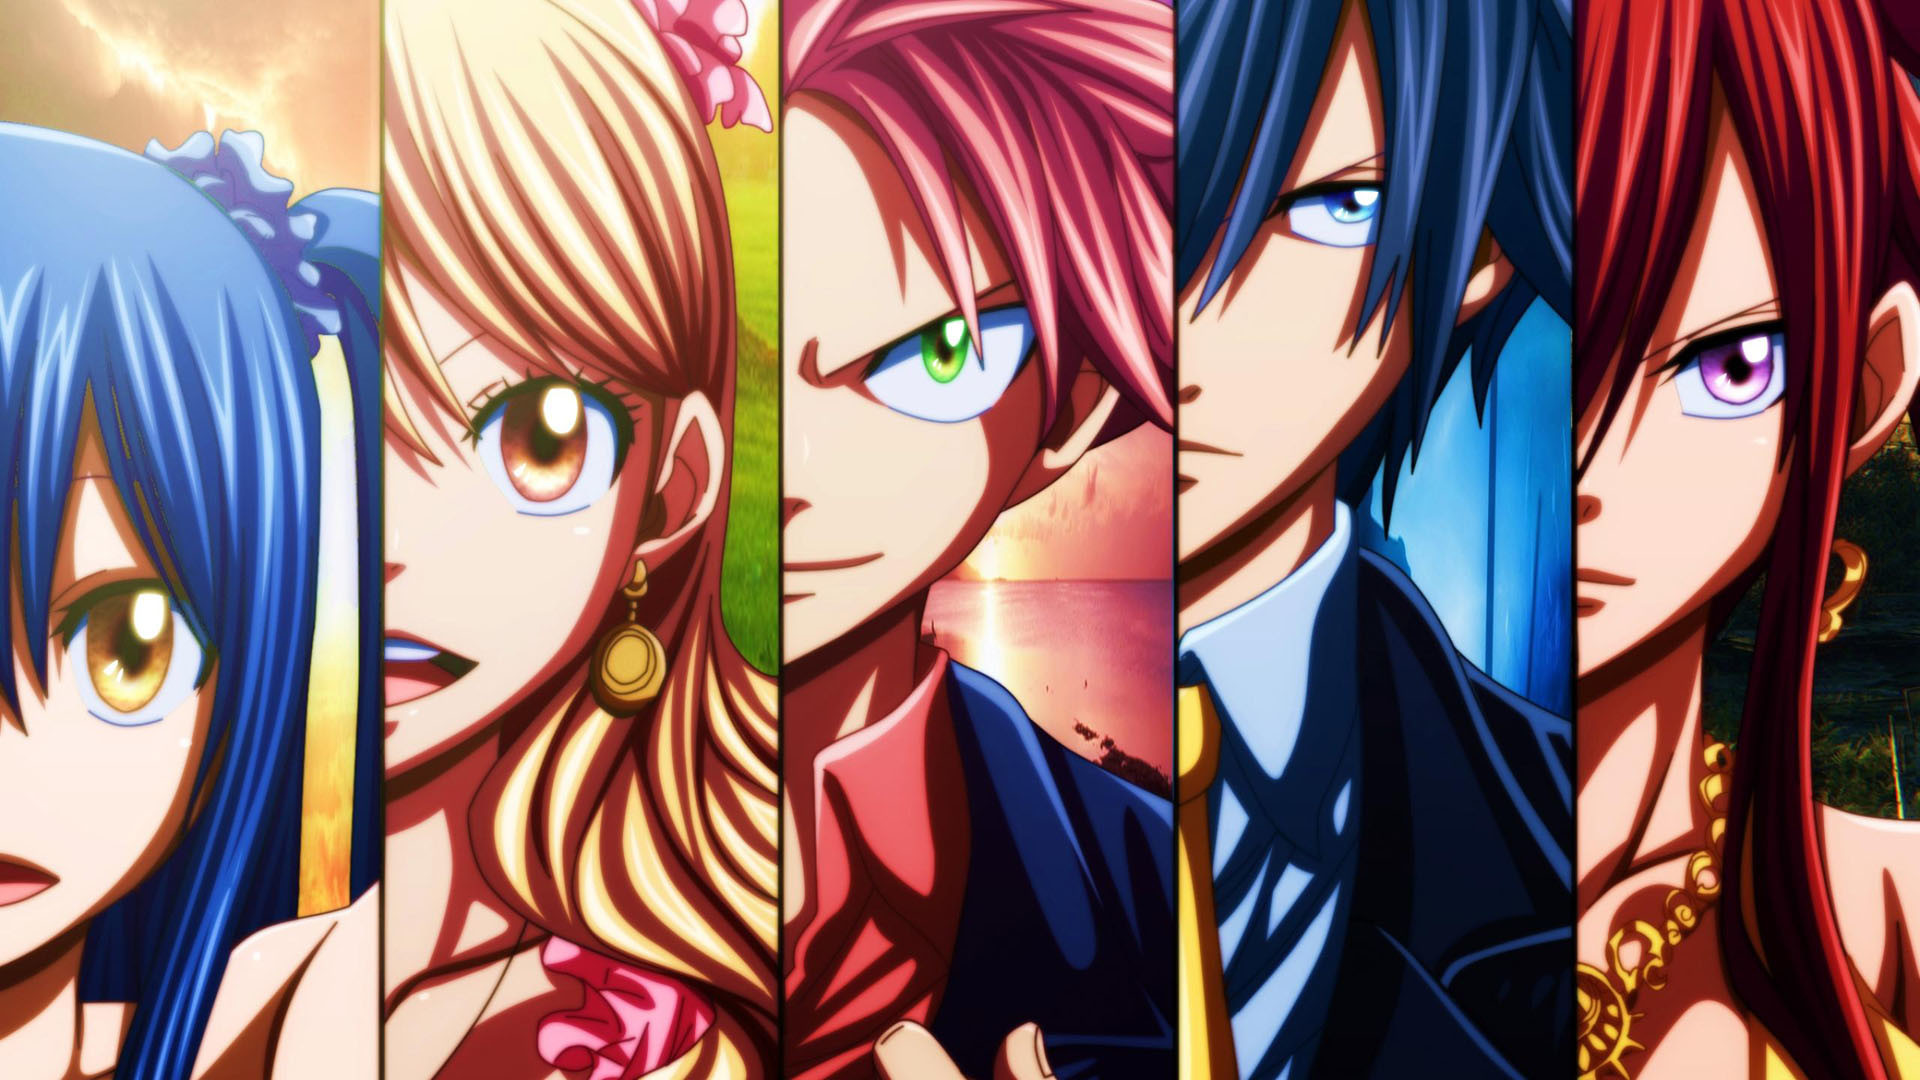 1920x1080 Anime Wallpaper: Fairy Tail Wallpapers Picture All Wallpaper .